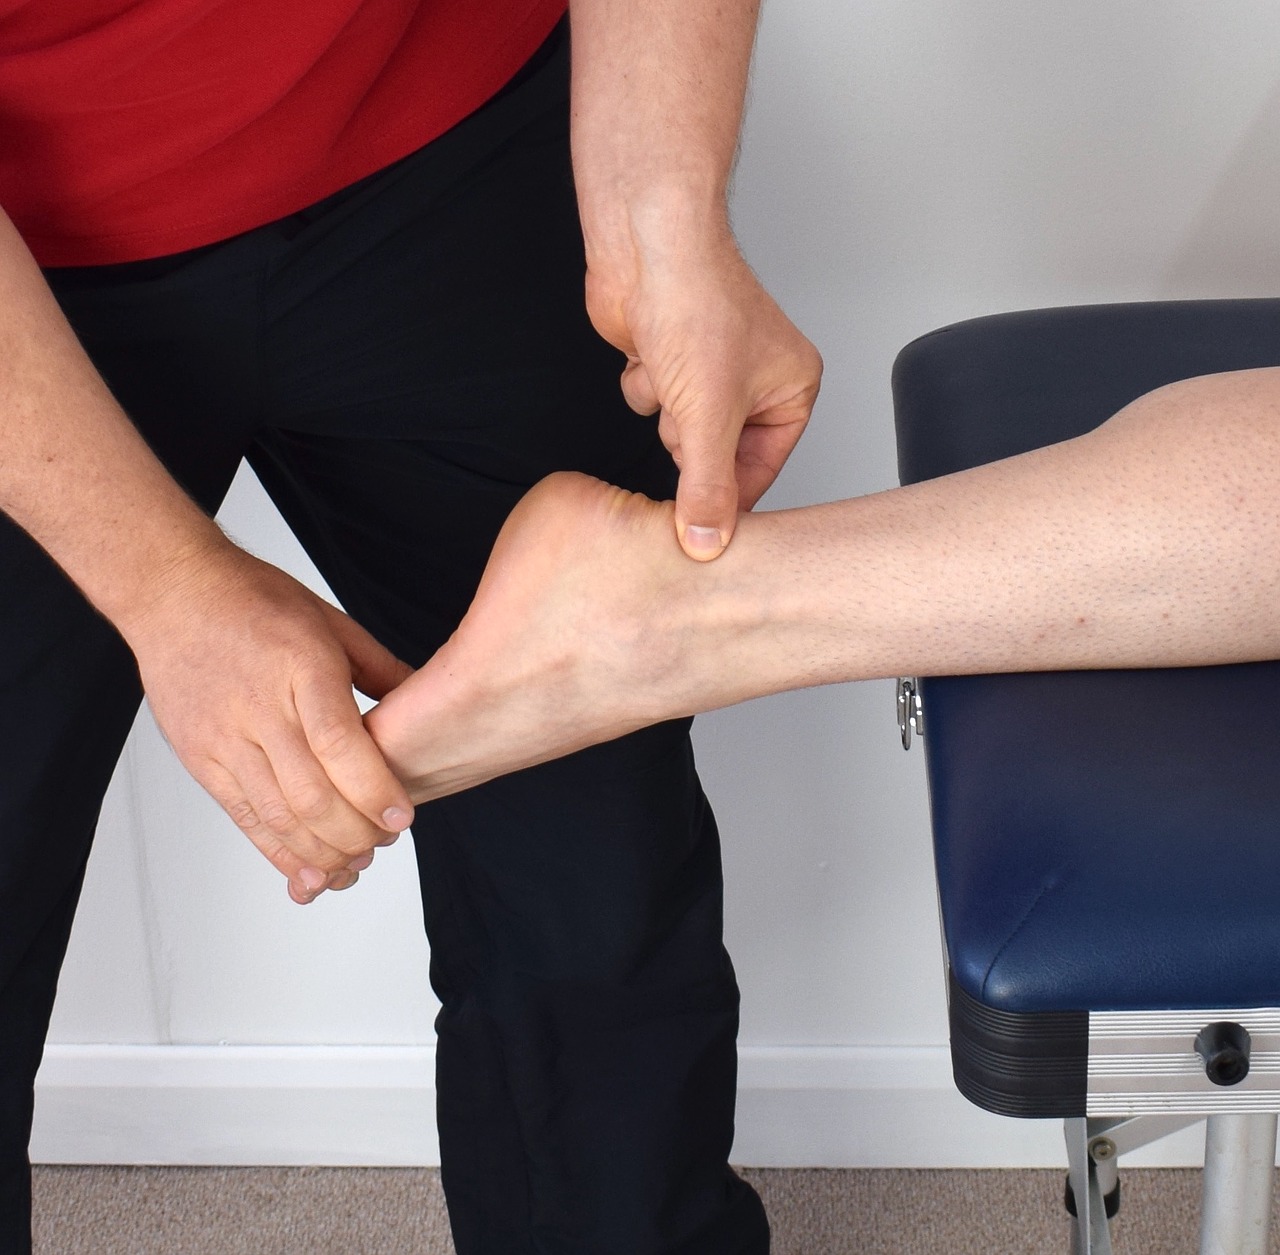 Tips for Improving Your Ankle Mobility